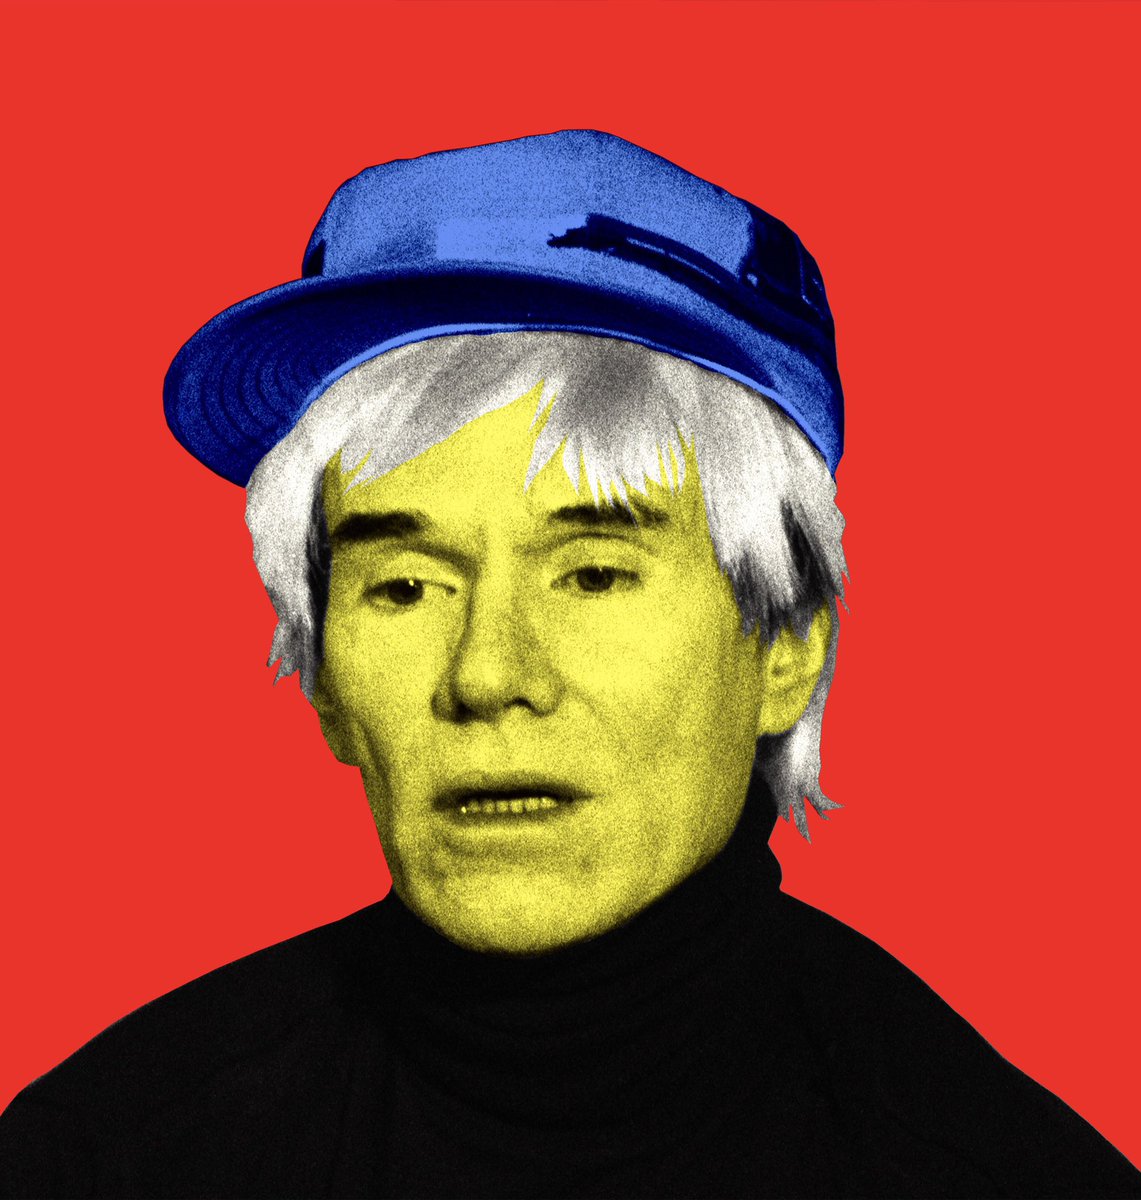 Hank O’Neal after shooting Warhol in his studio in 1985 Warhol’d Warhol & created a digital version in 2005 & 17+ years later were releasing his 100 1/1 digital iterations as #WarholNFTs #history #art #photographynfts #Warhol #LFG